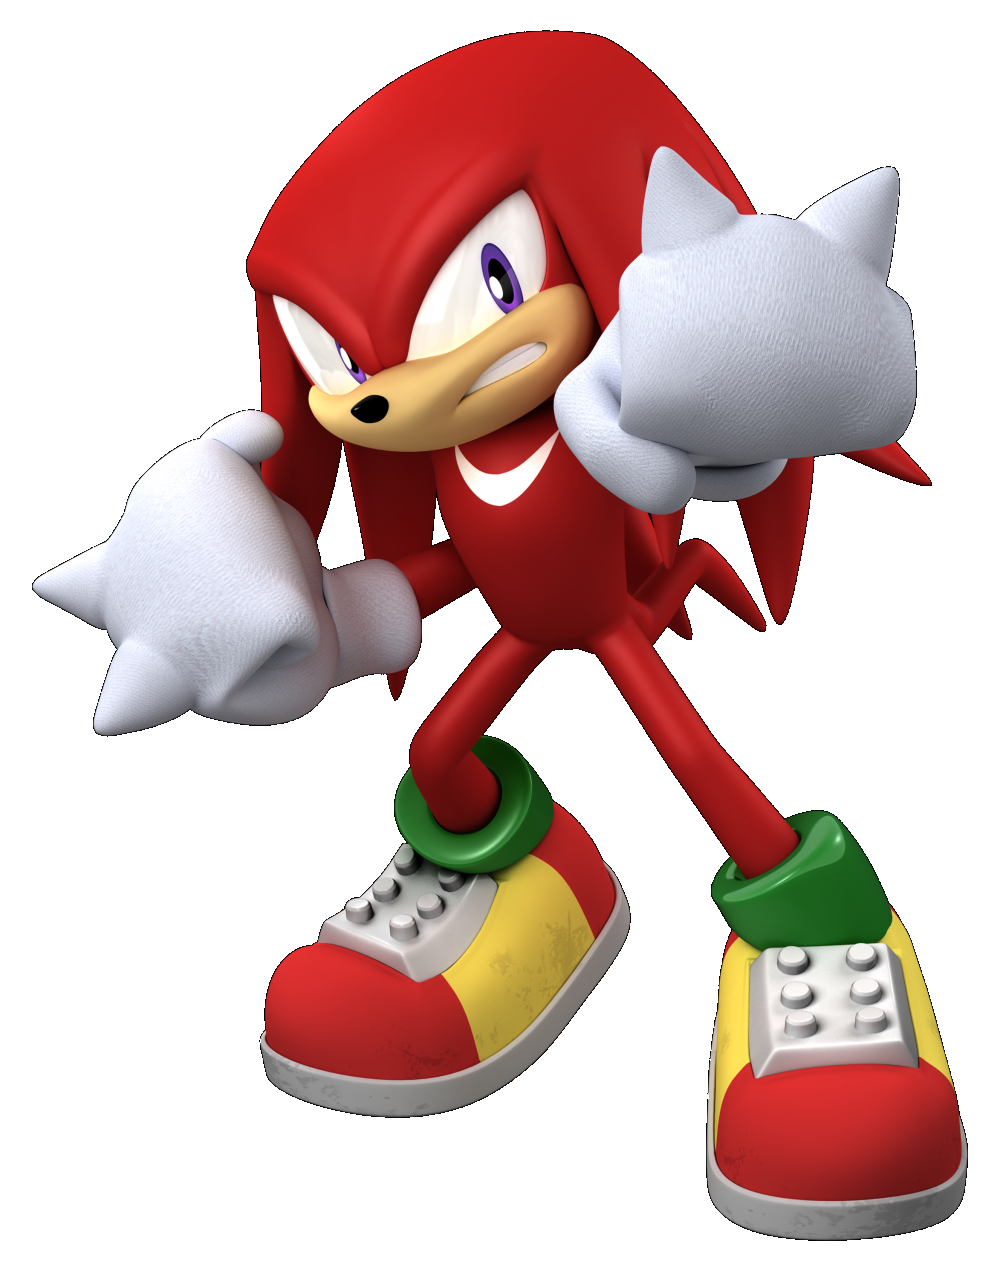 Knuckles the echidna naruto. Pointing clipart knuckle